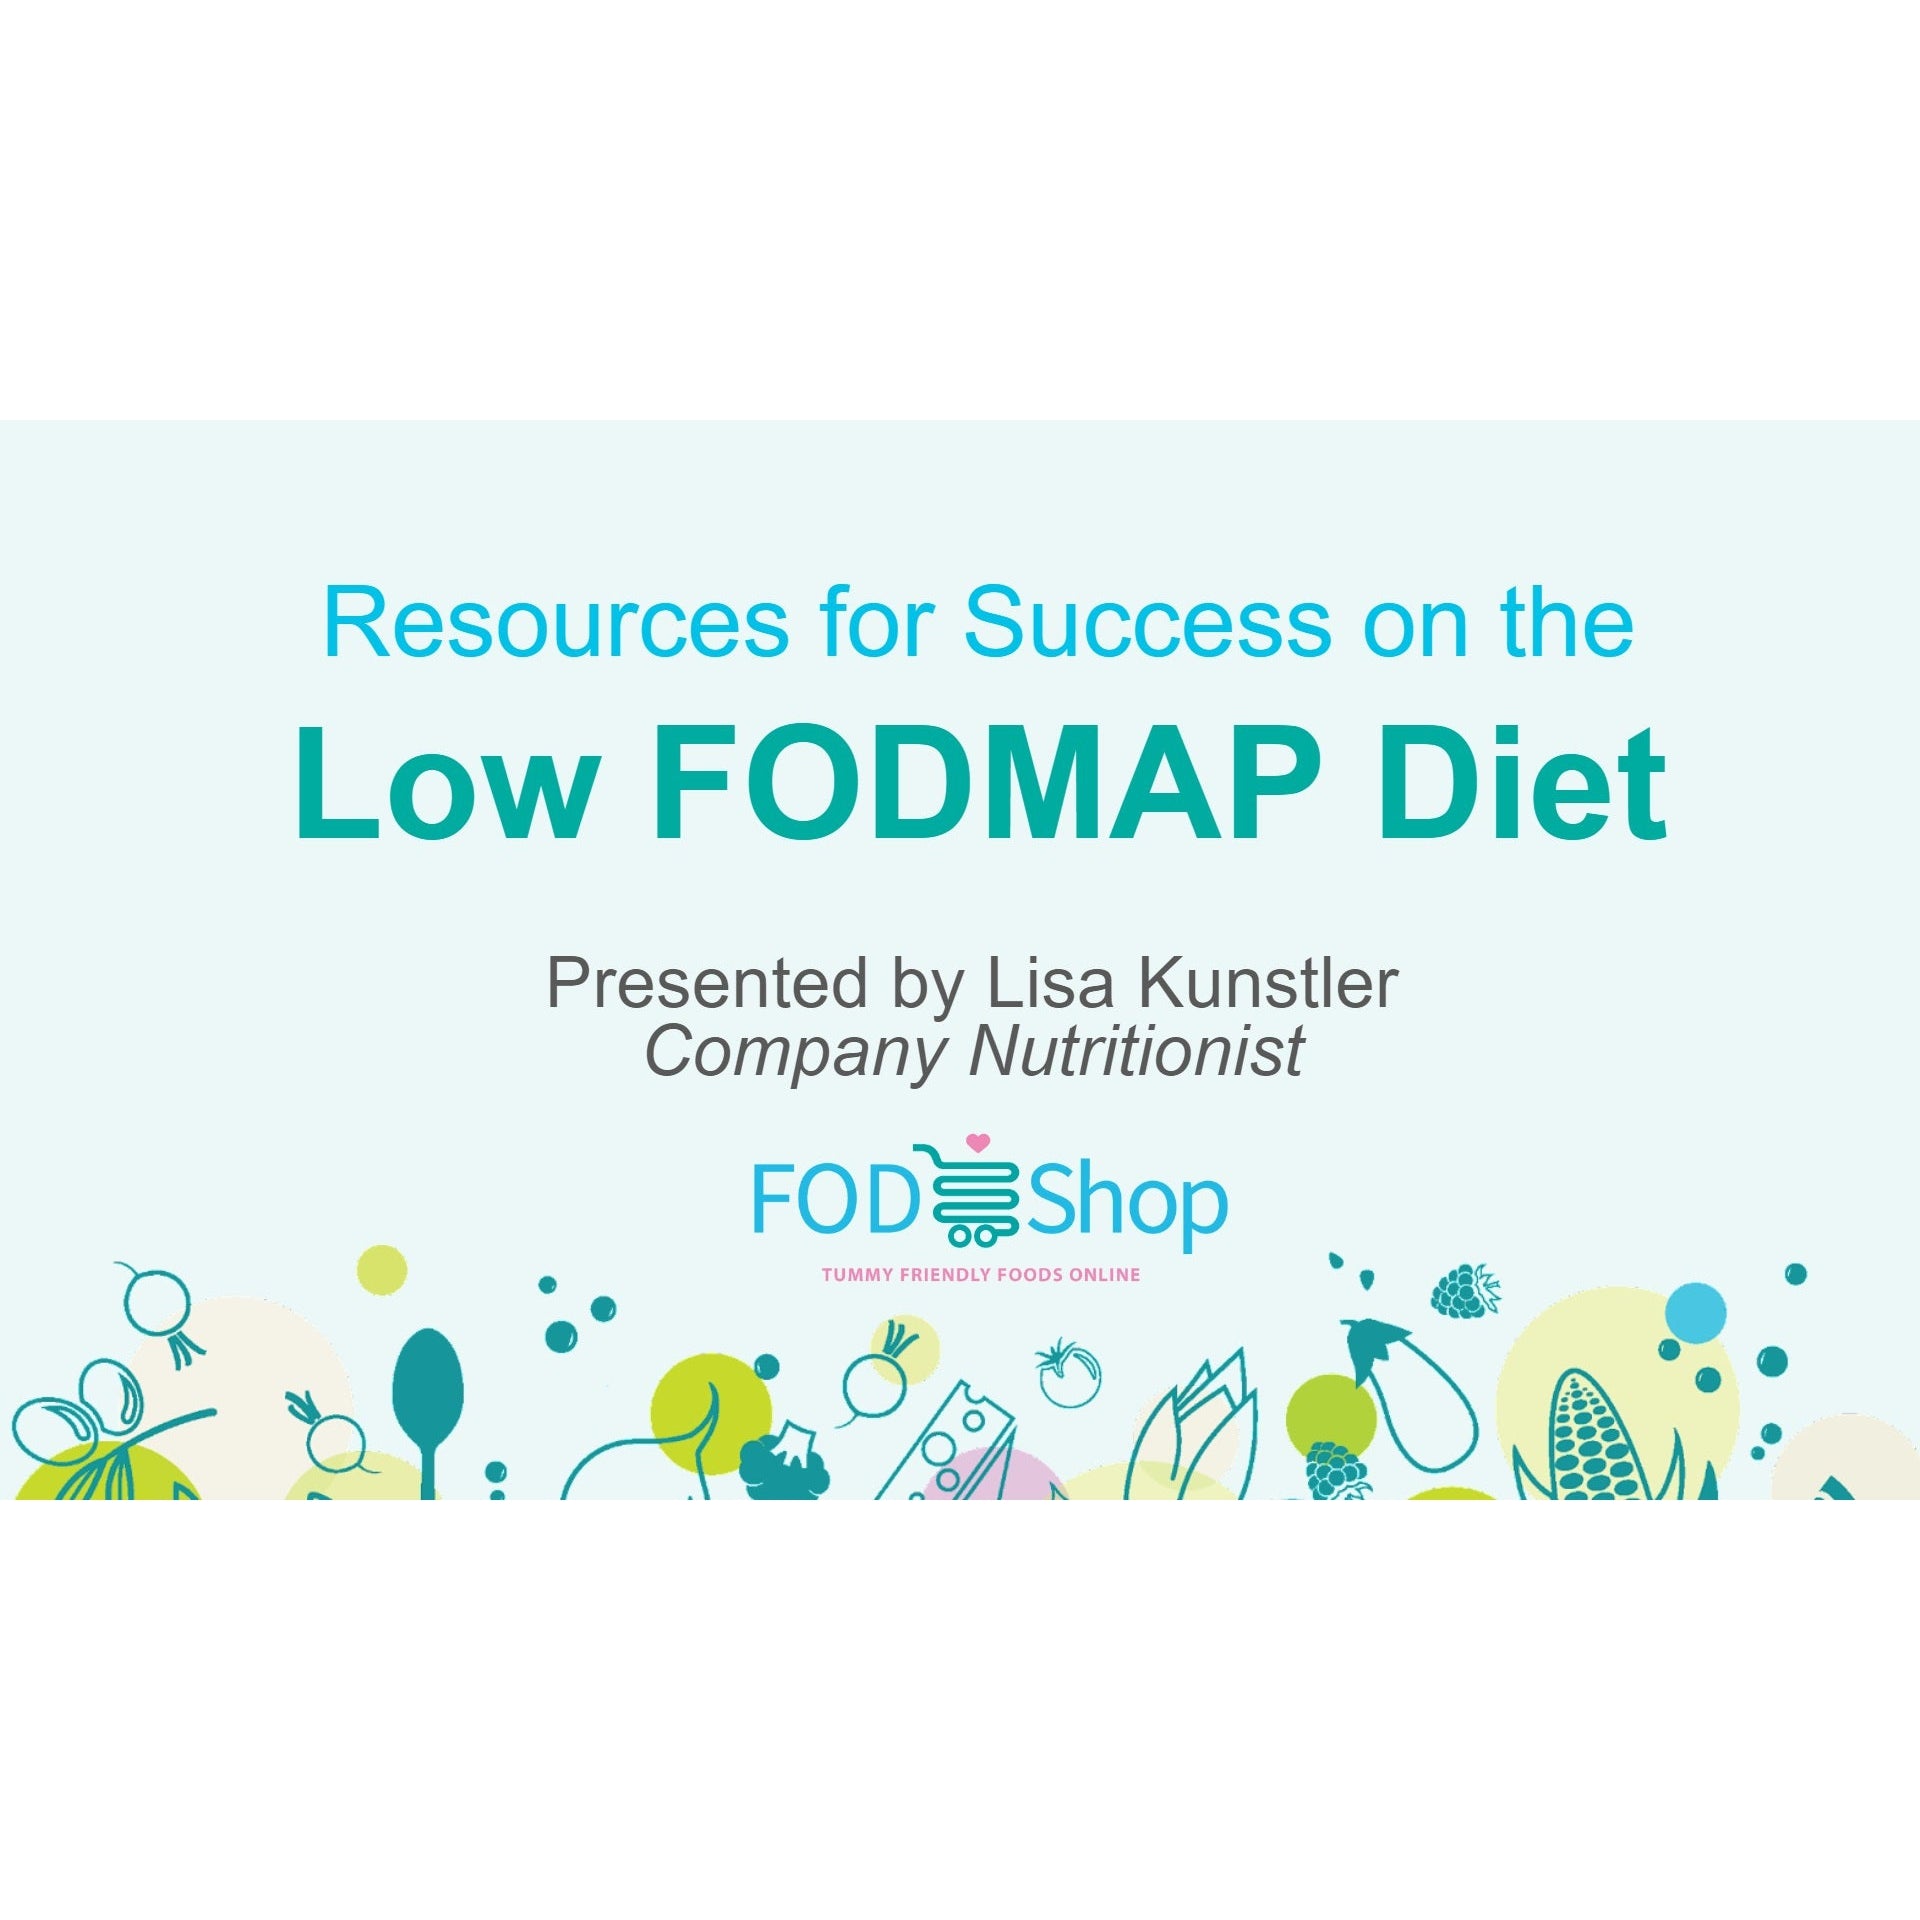 An Introduction to the Low FODMAP Diet & Key Success Resources